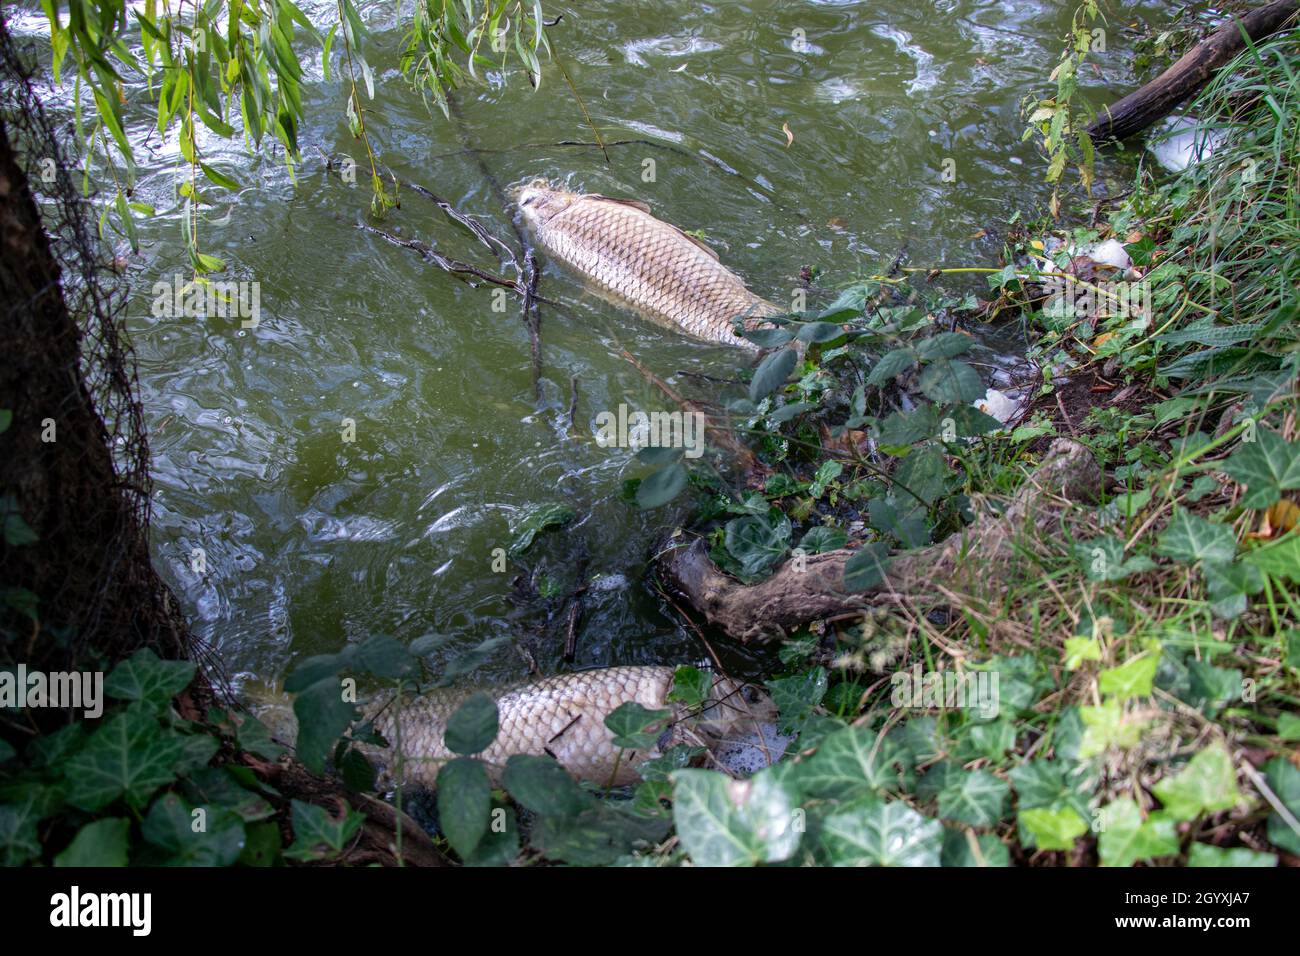 One of a dosens  dead fish (common carp) which have been found floating around Lagoon Lake in Stanley Park in October 2021 Stock Photo